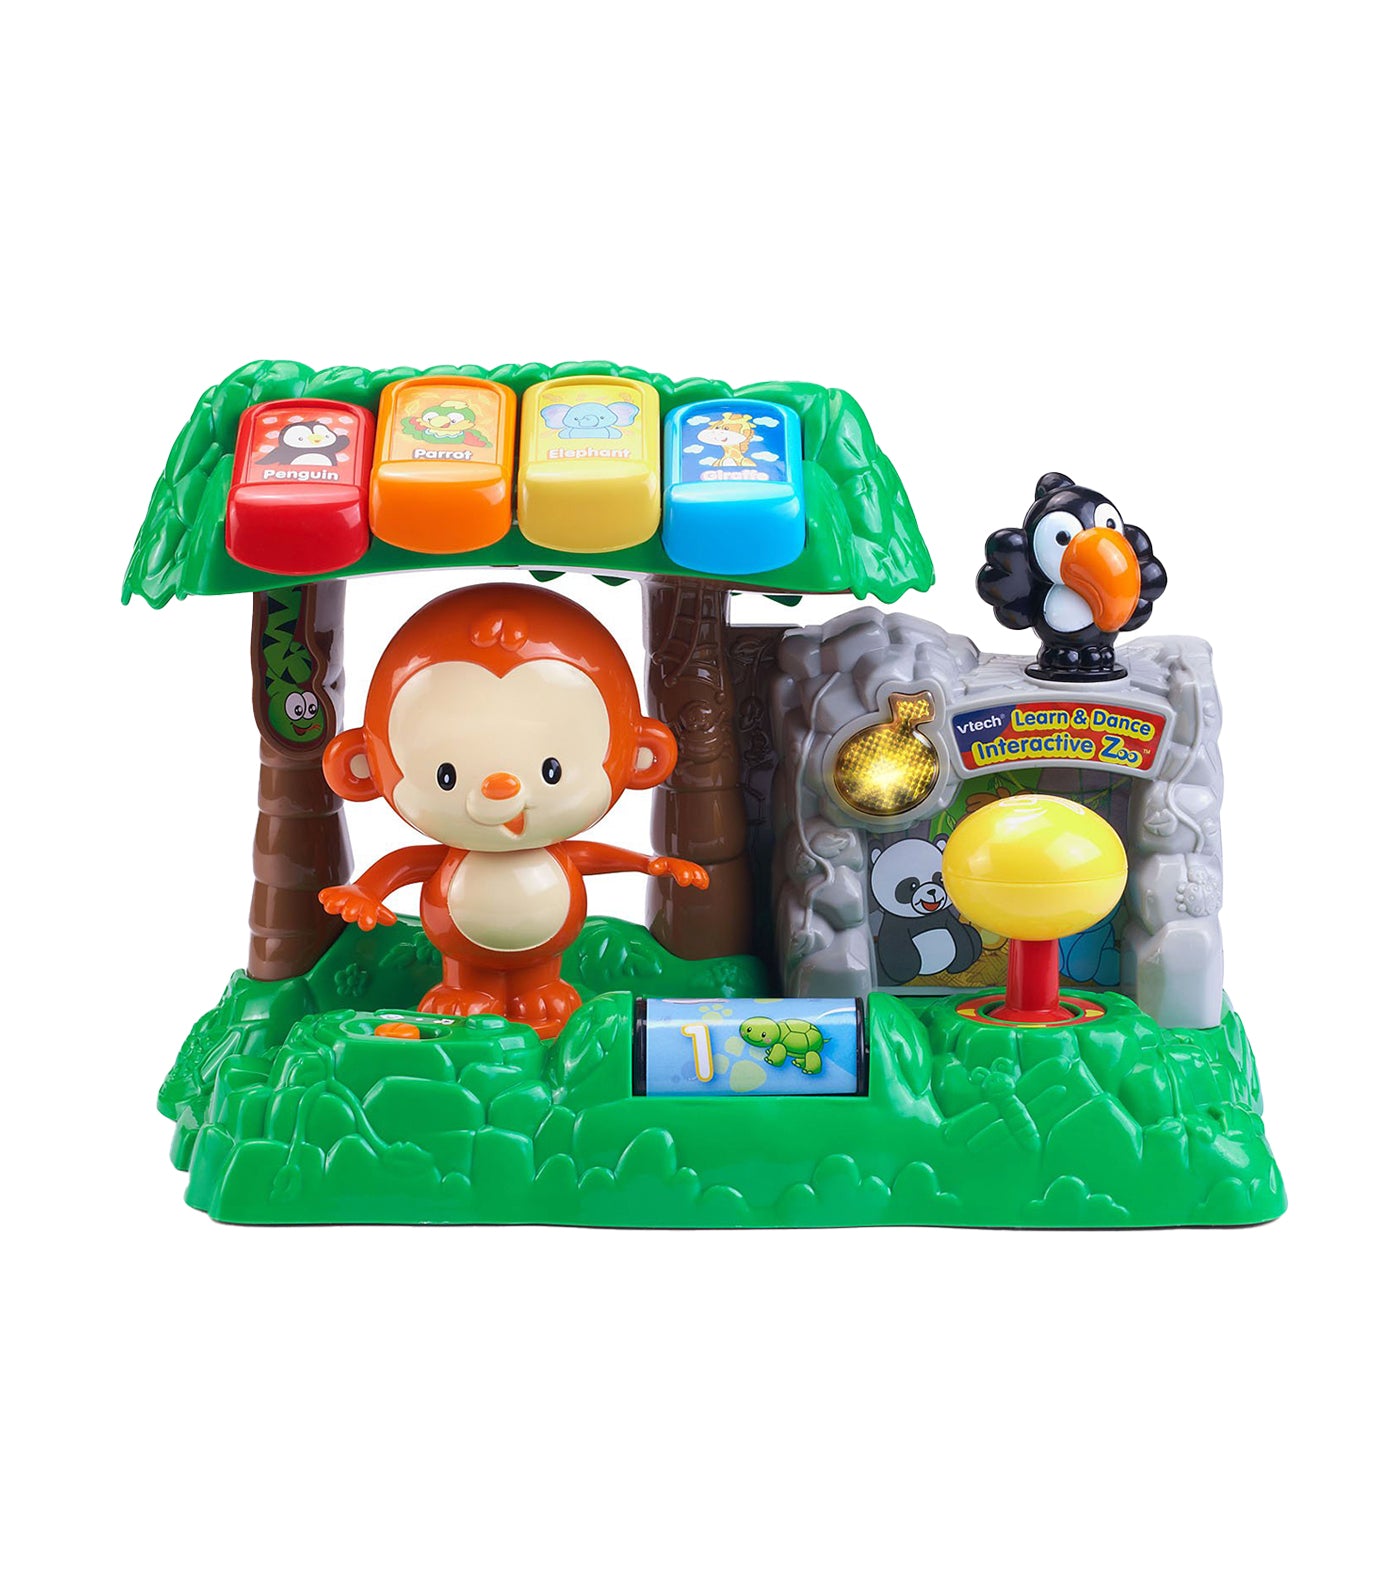 vtech learn and dance interactive zoo